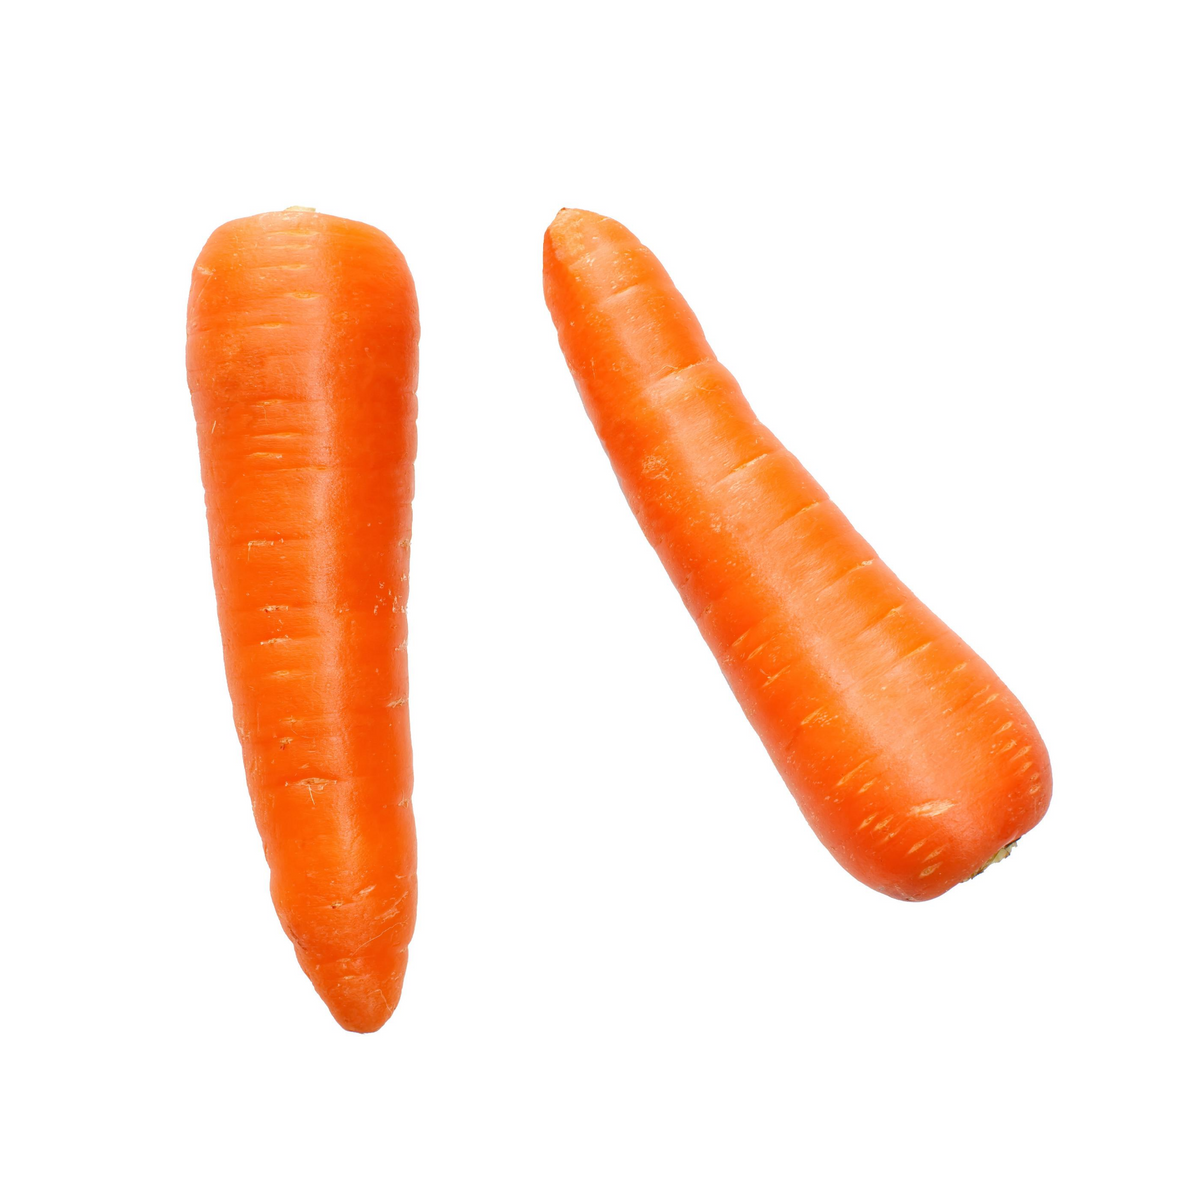 Cone-Shaped Carrot Cello Treat Bags, 6in x 11in, 15ct